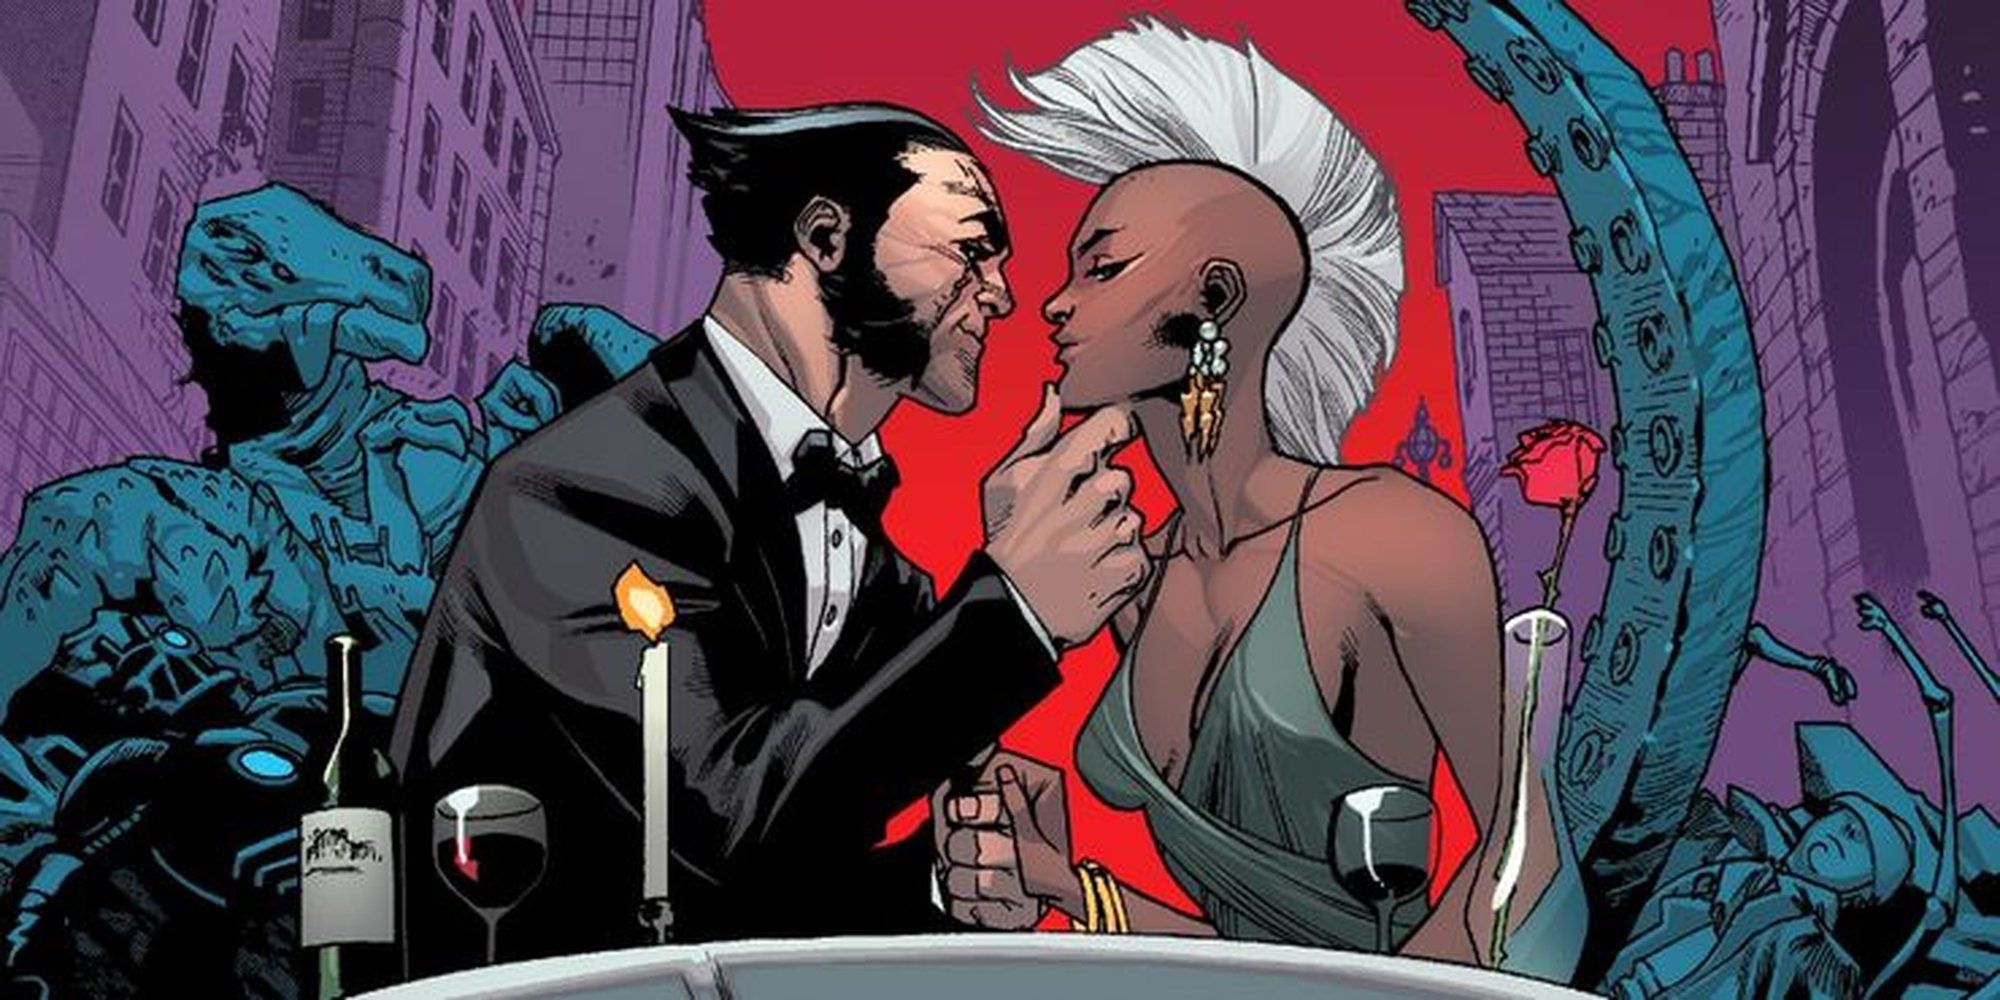 Wolverine and Storm on a date in Marvel Comics